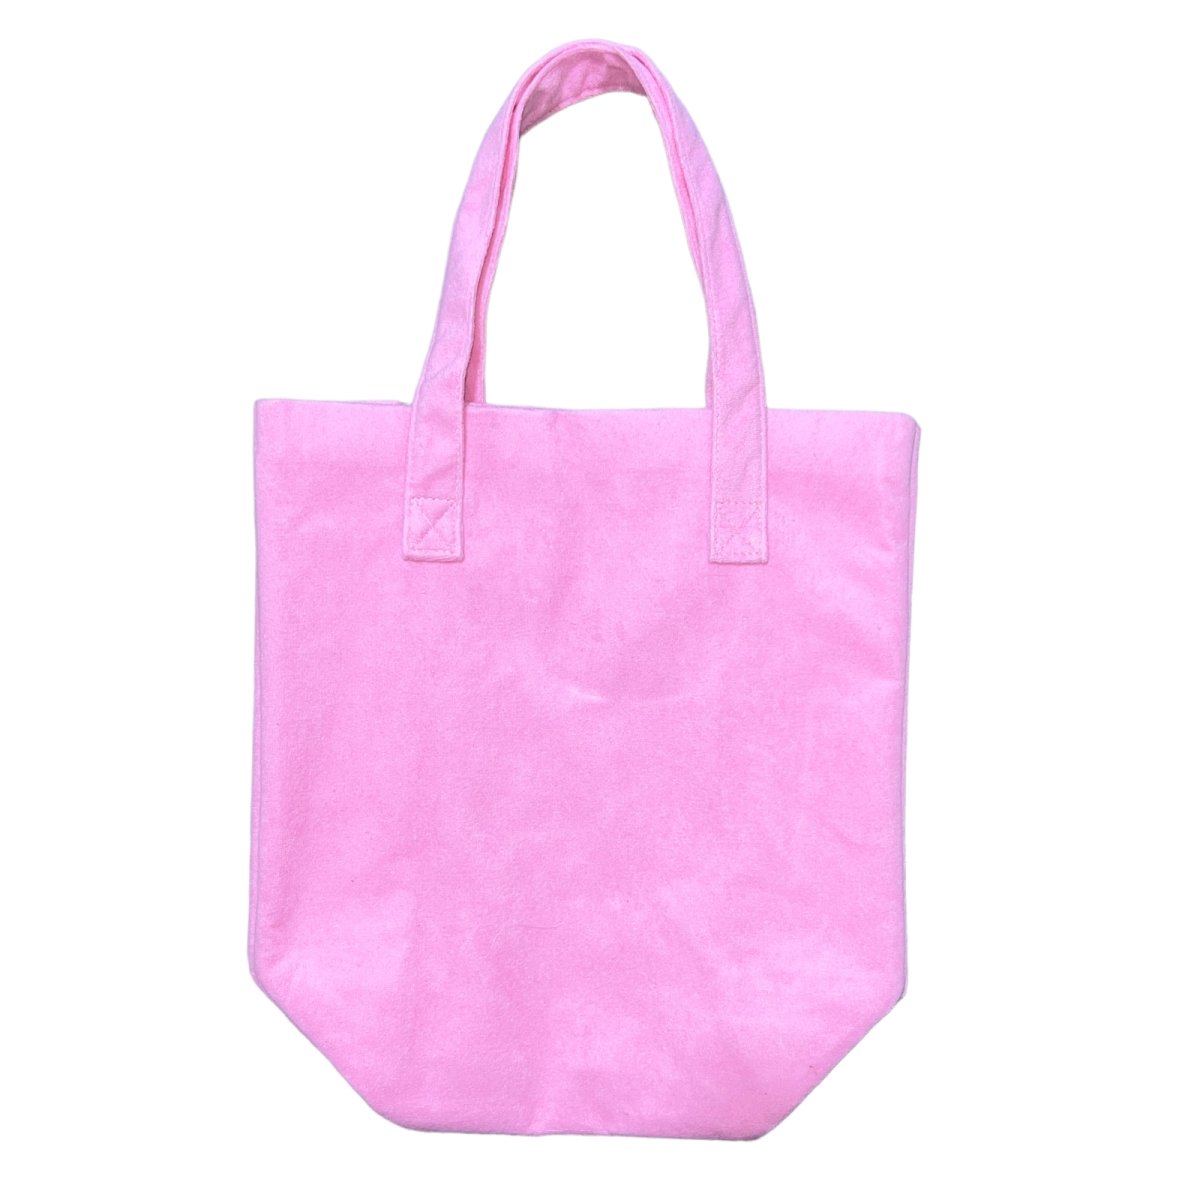 TERRY TOTE